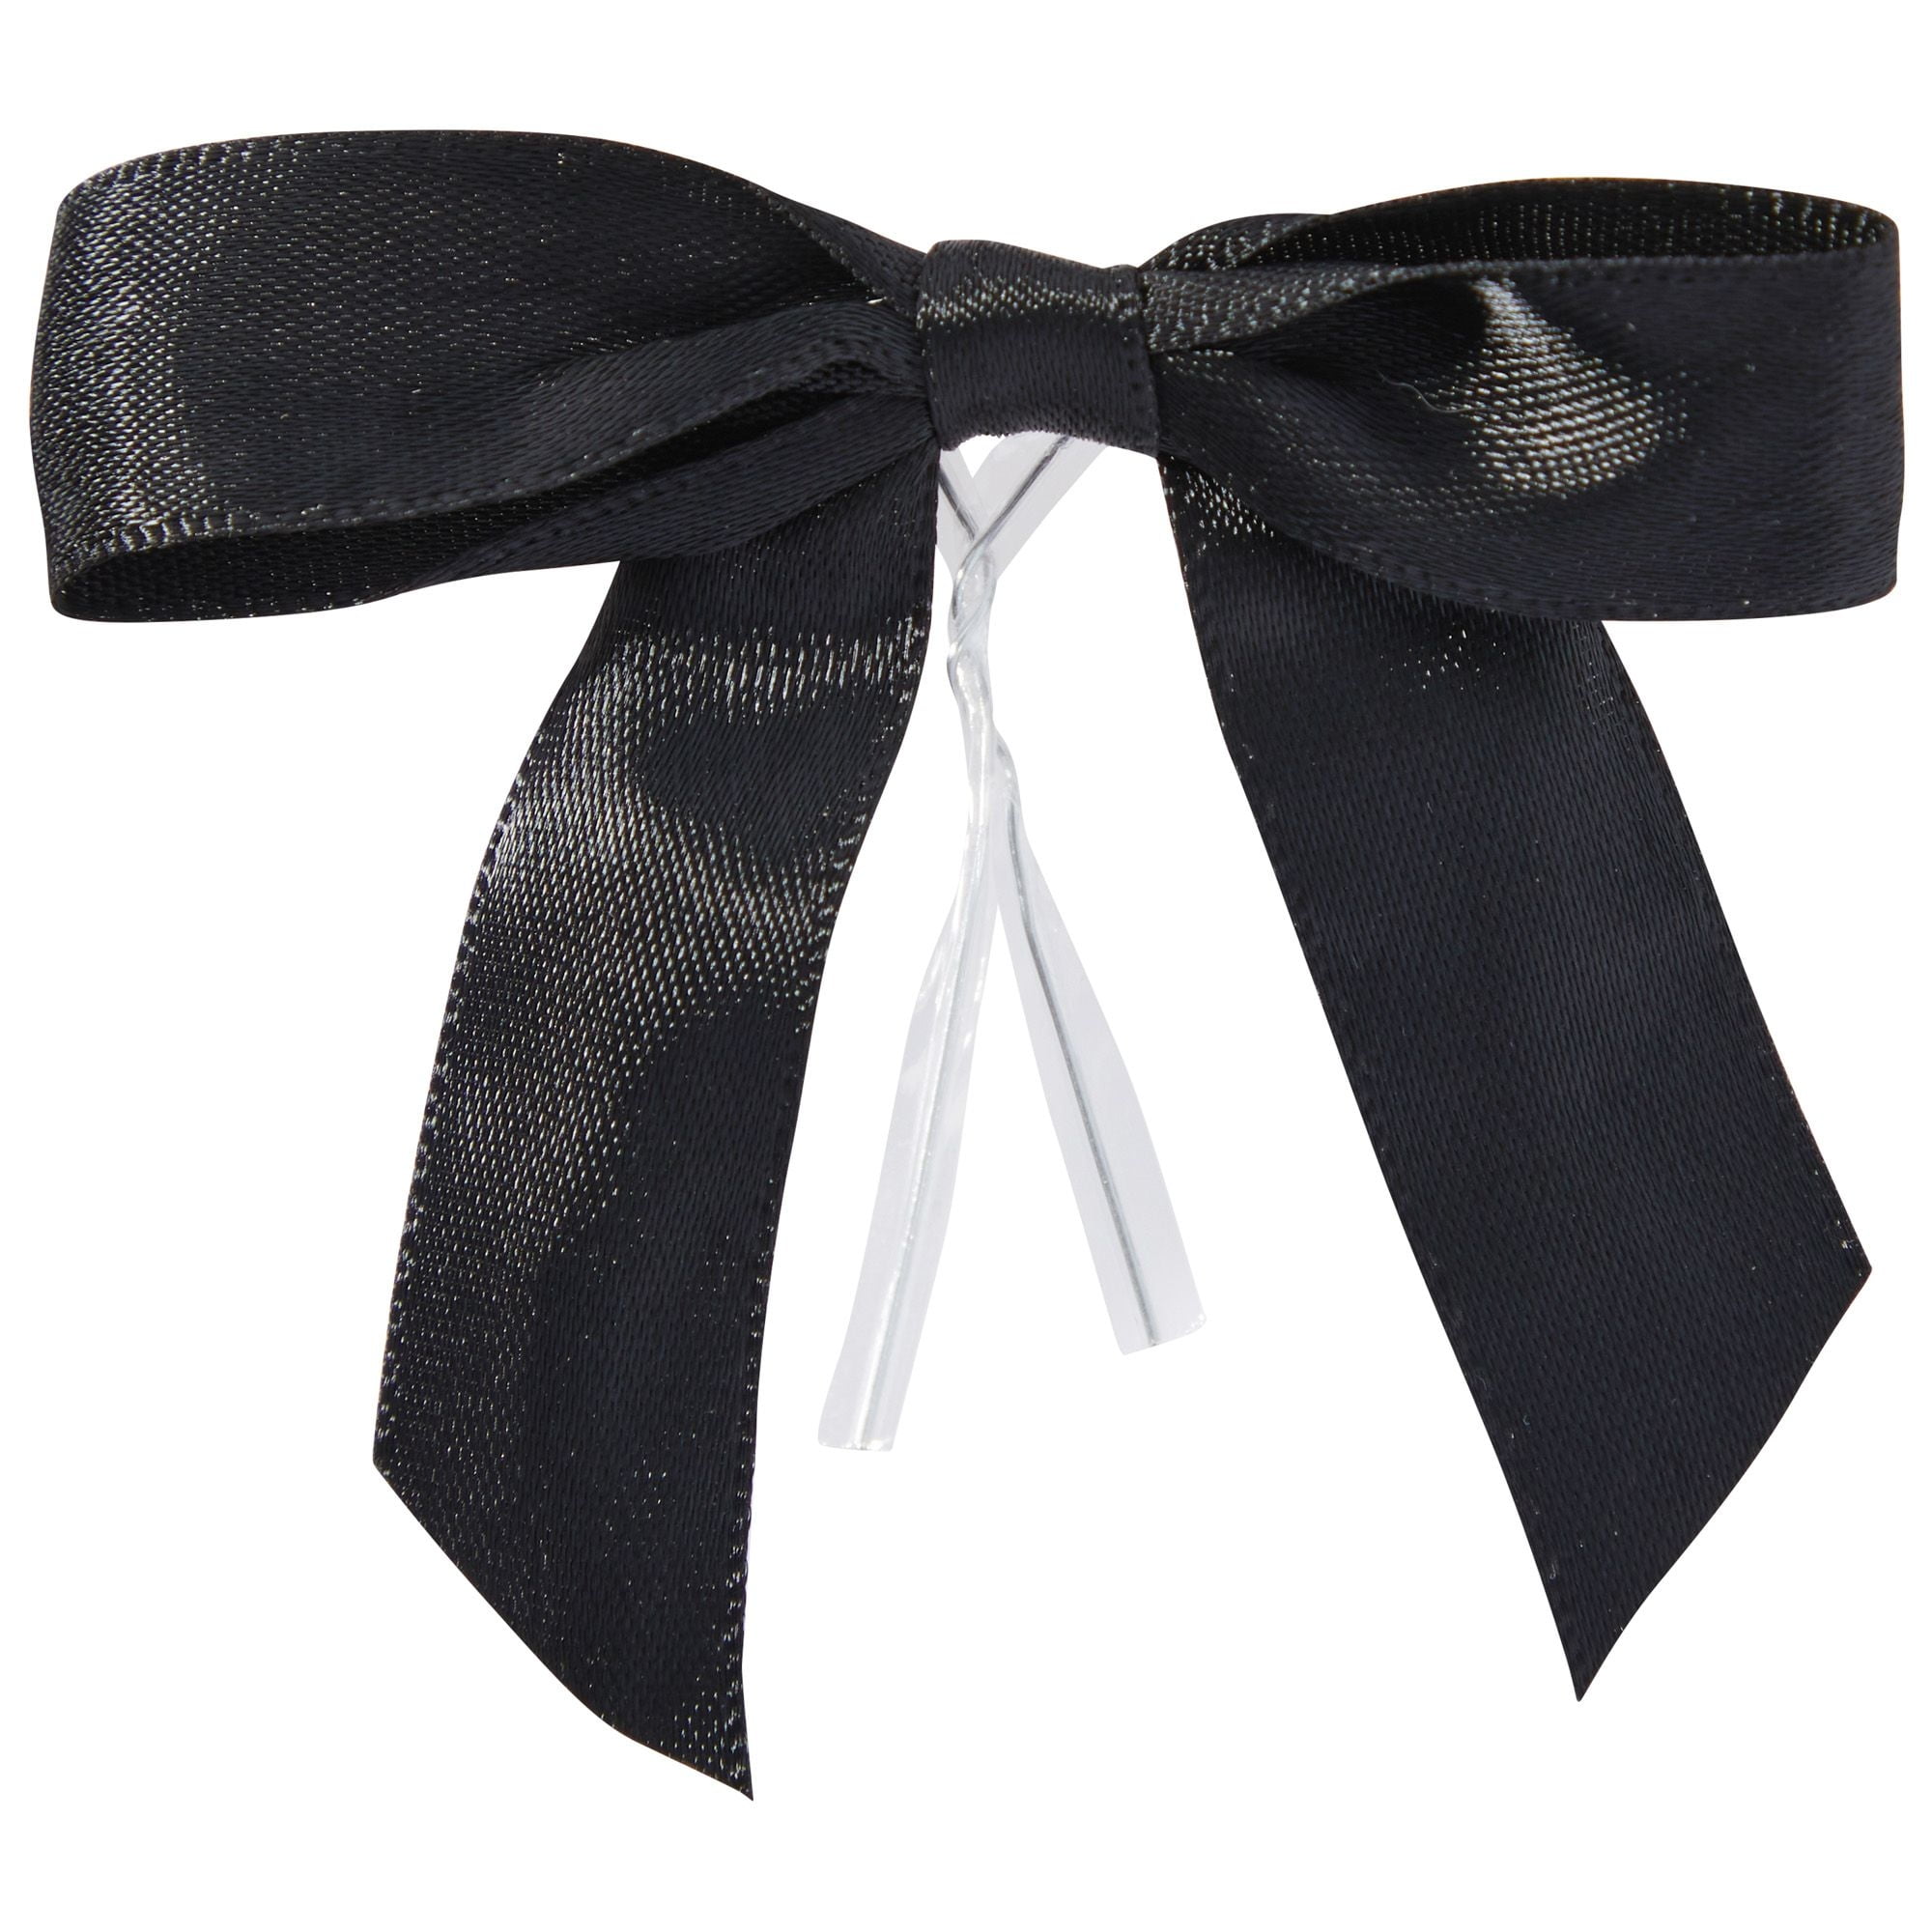 10pcs 7 Metallic Large Big Pull Bow Gift Wrapping Bows Ribbon for